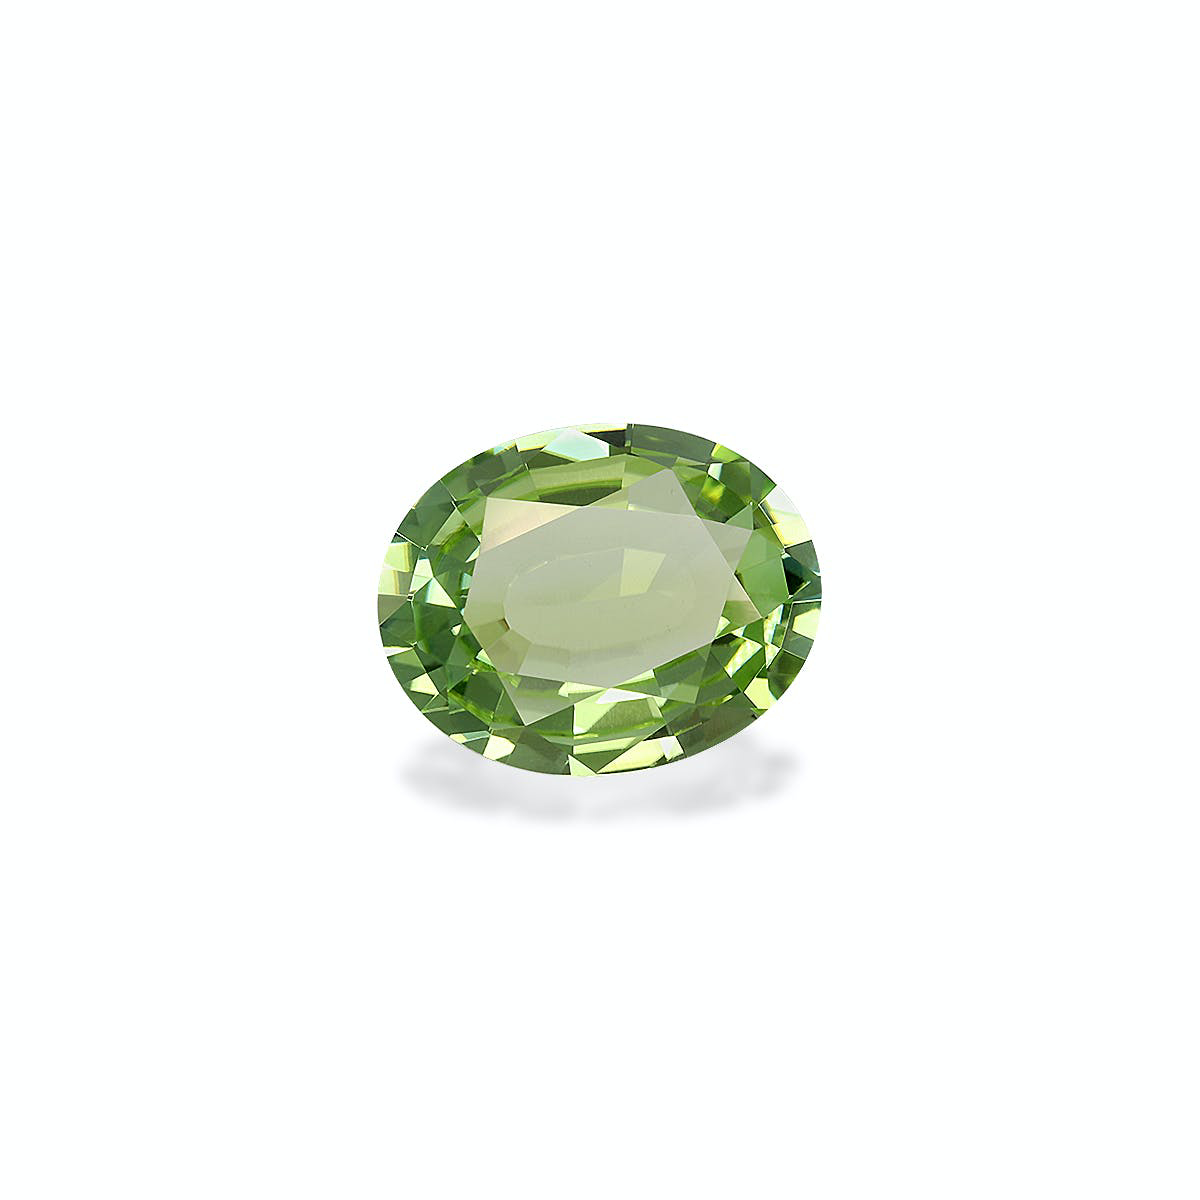 Picture of Lime Green Tourmaline 5.38ct (TG1675)